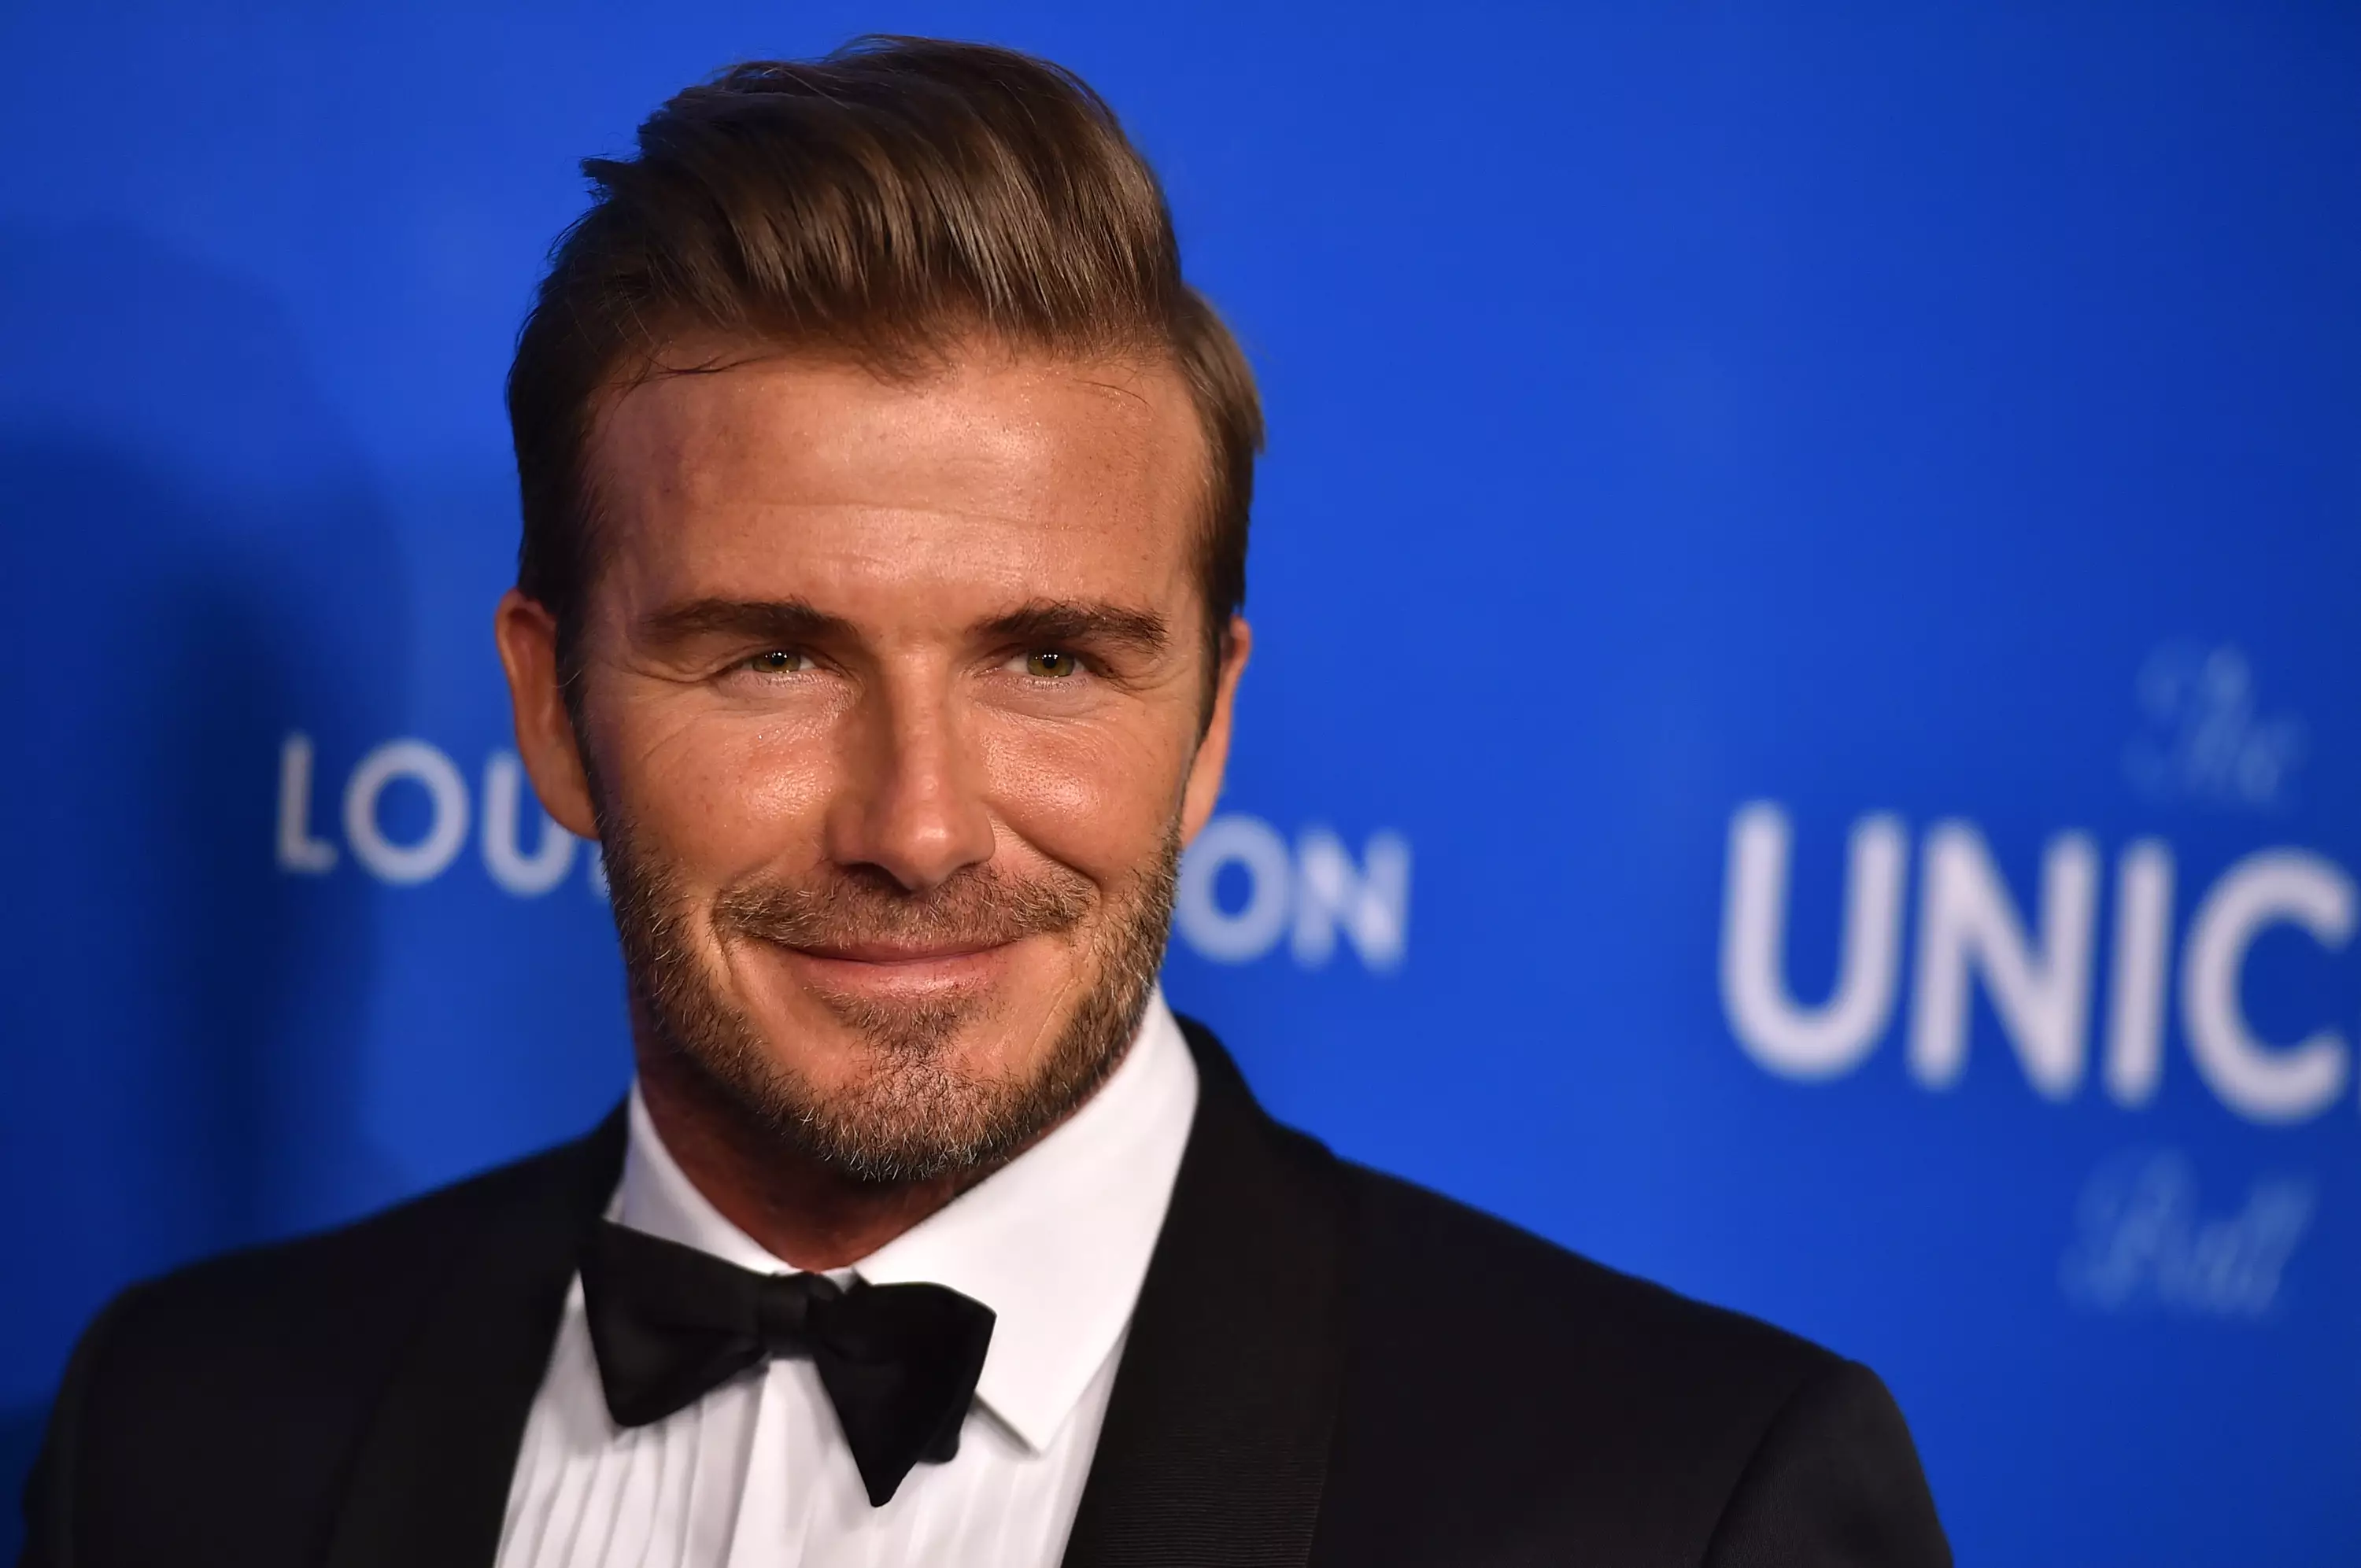 David Beckham Reveals That Man United Tried To Sell Him Without Him Knowing